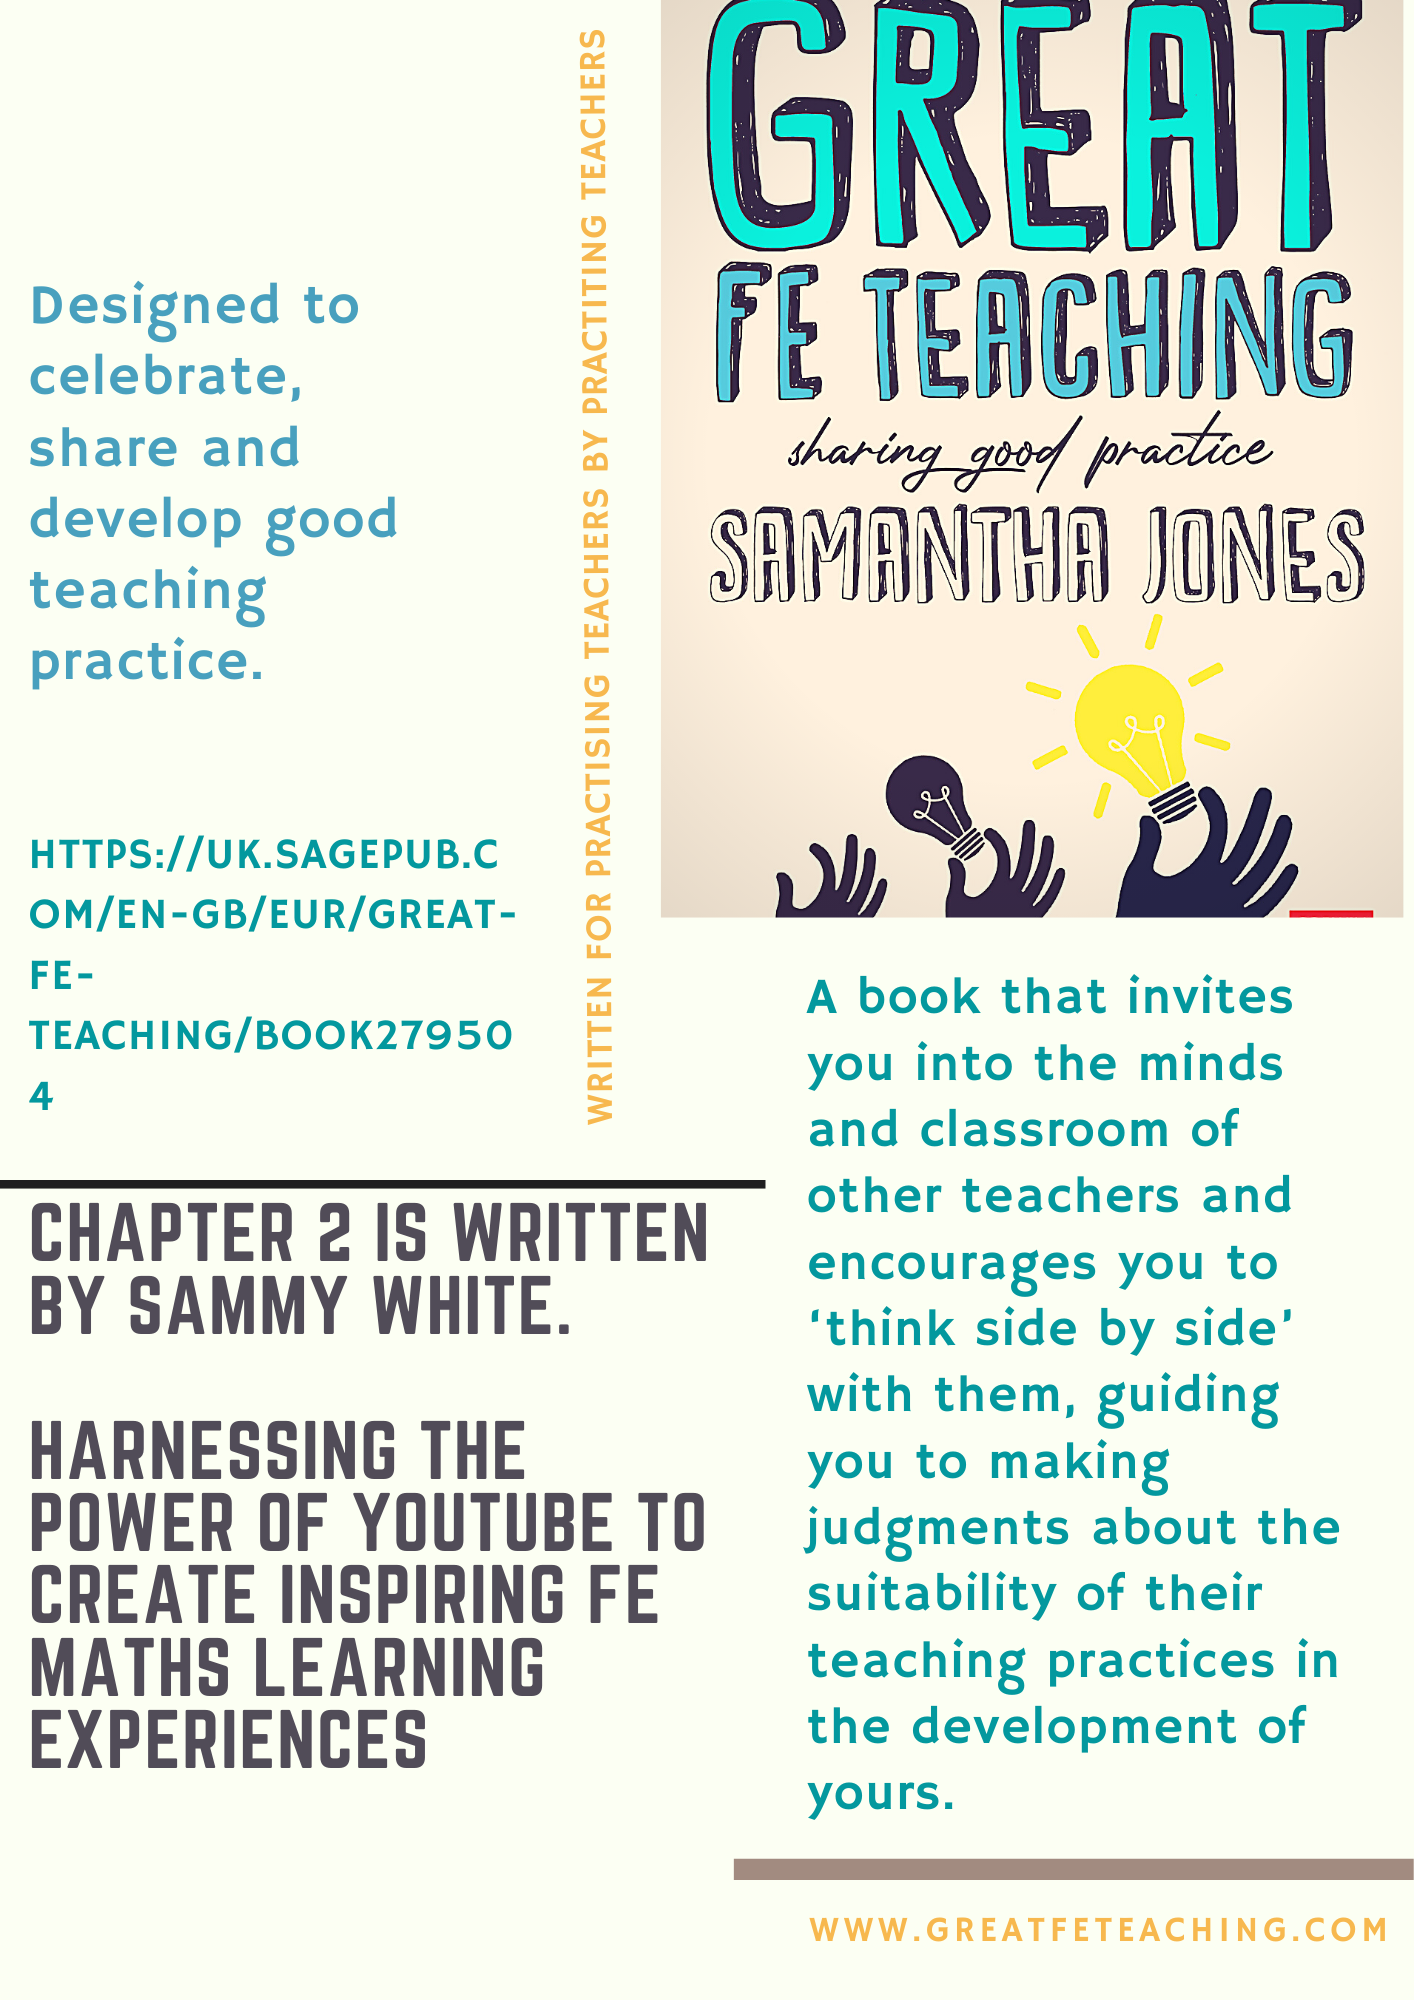 A book that invites you into the minds and classroom of other teachers and encourages you to ‘think side by side’ with them, guiding you to making judgments about the suitability of their teaching practices in the development of yours.Designed to celebrate, share and develop good teaching practice.